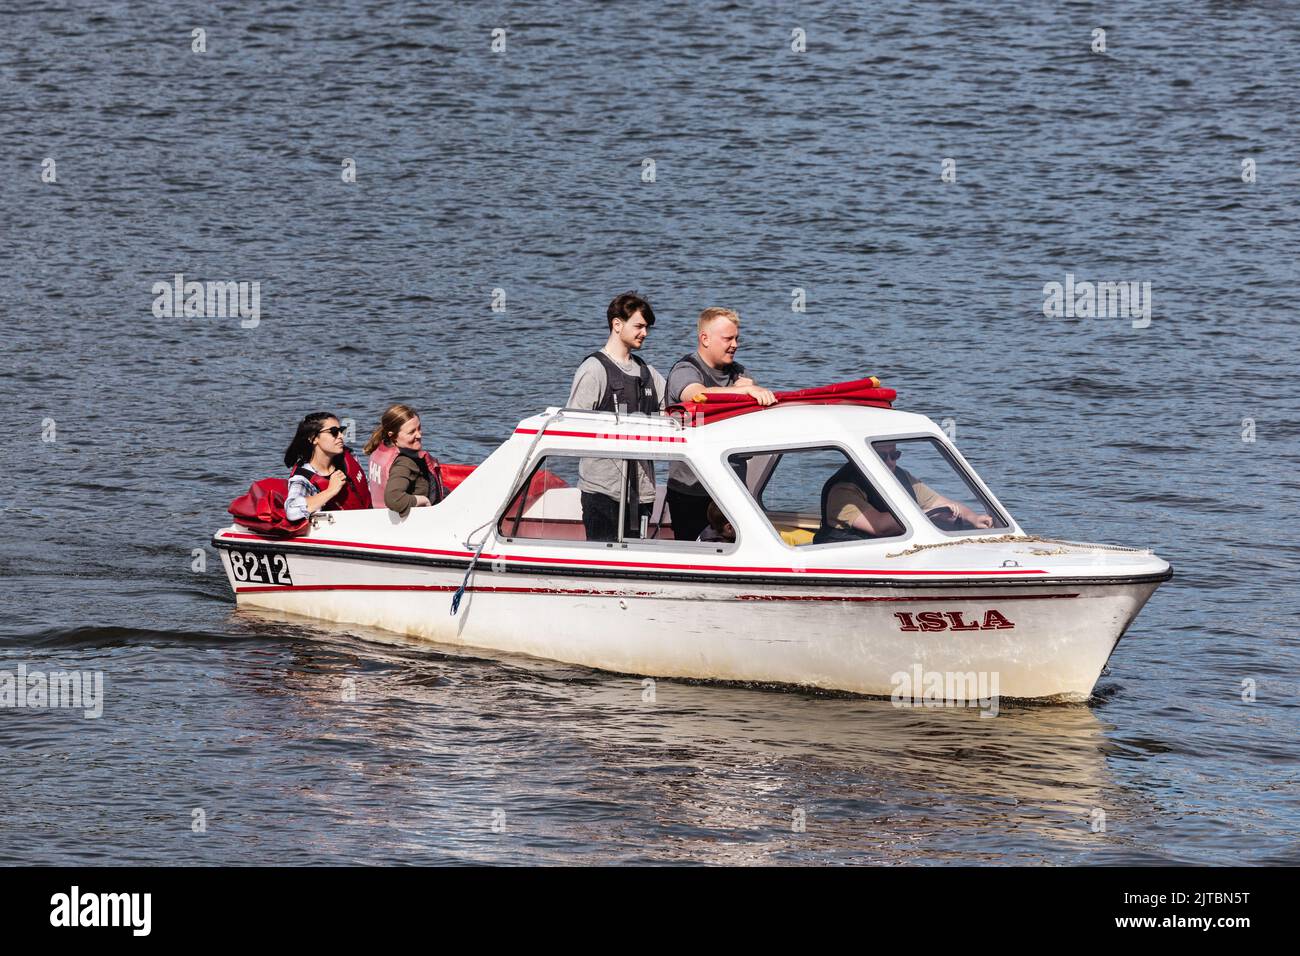 Quiet Self-Drive Electric Motor Boat Hire Explore Lake Windermere , boats can be hired for 1 or 2 hours. Dogs are welcome on board Maximum 6 people Stock Photo